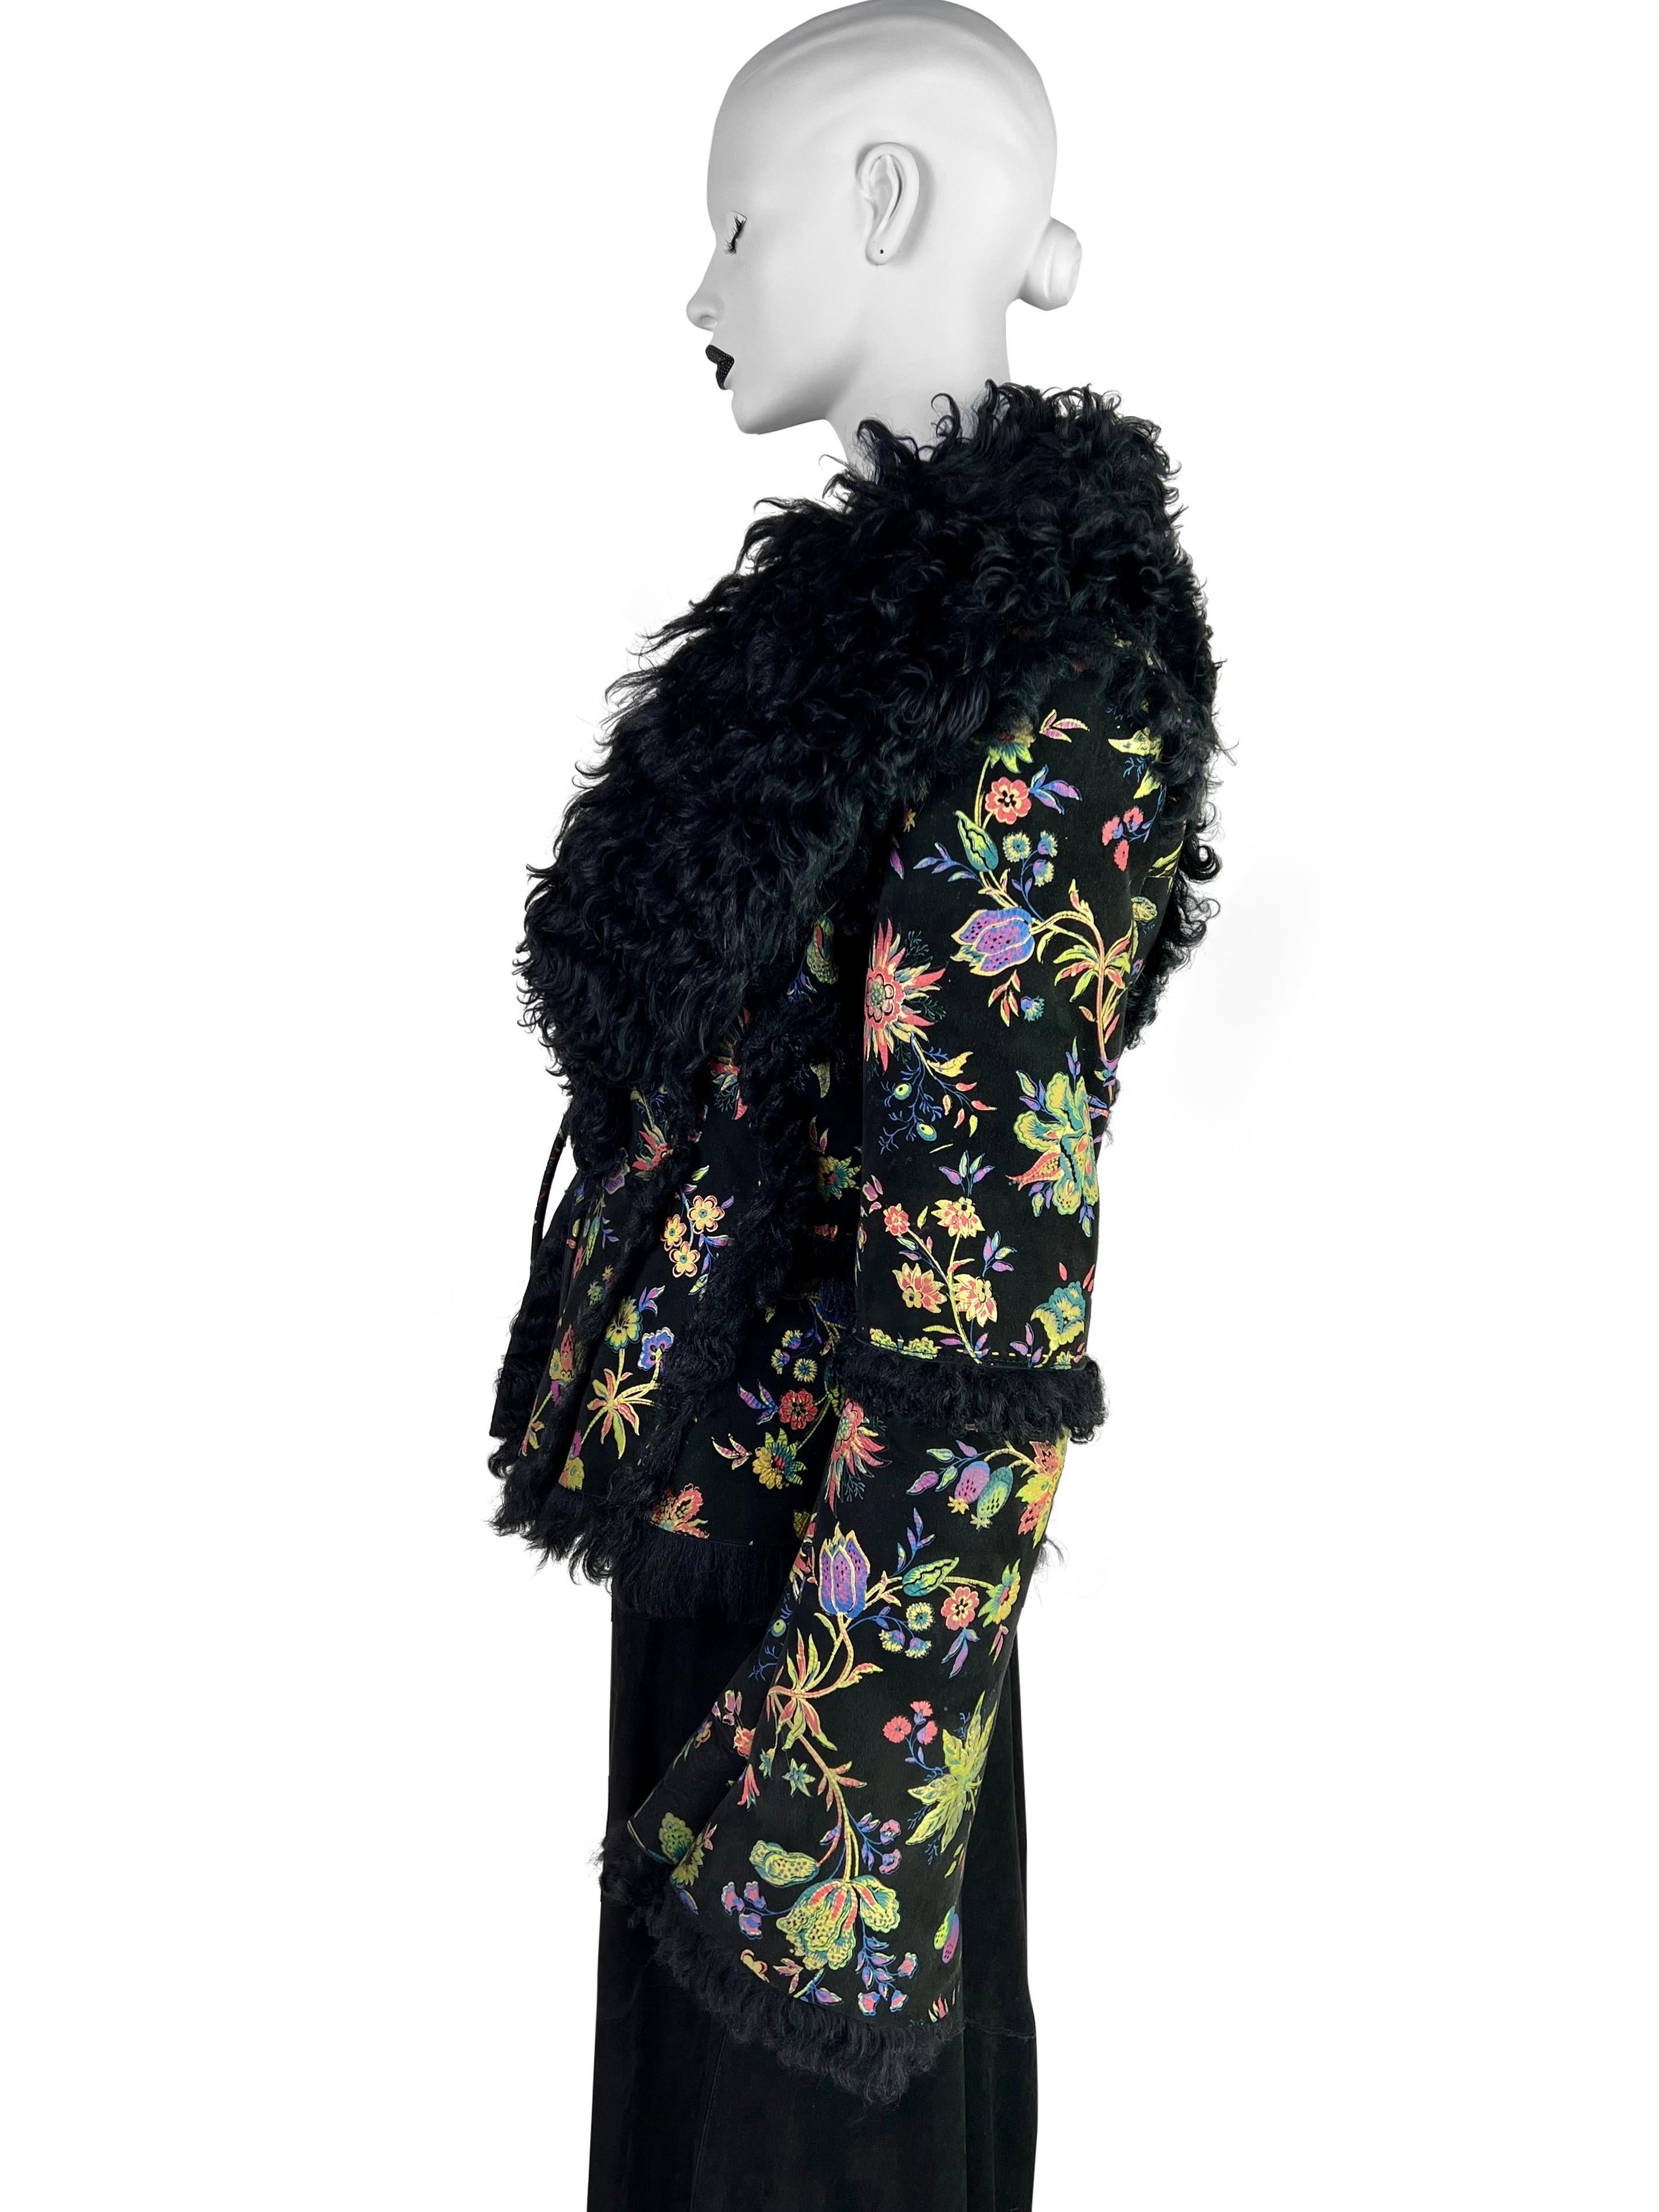 Roberto Cavalli Fall 1999 Hand-painted Flower Shearling Jacket For Sale 1